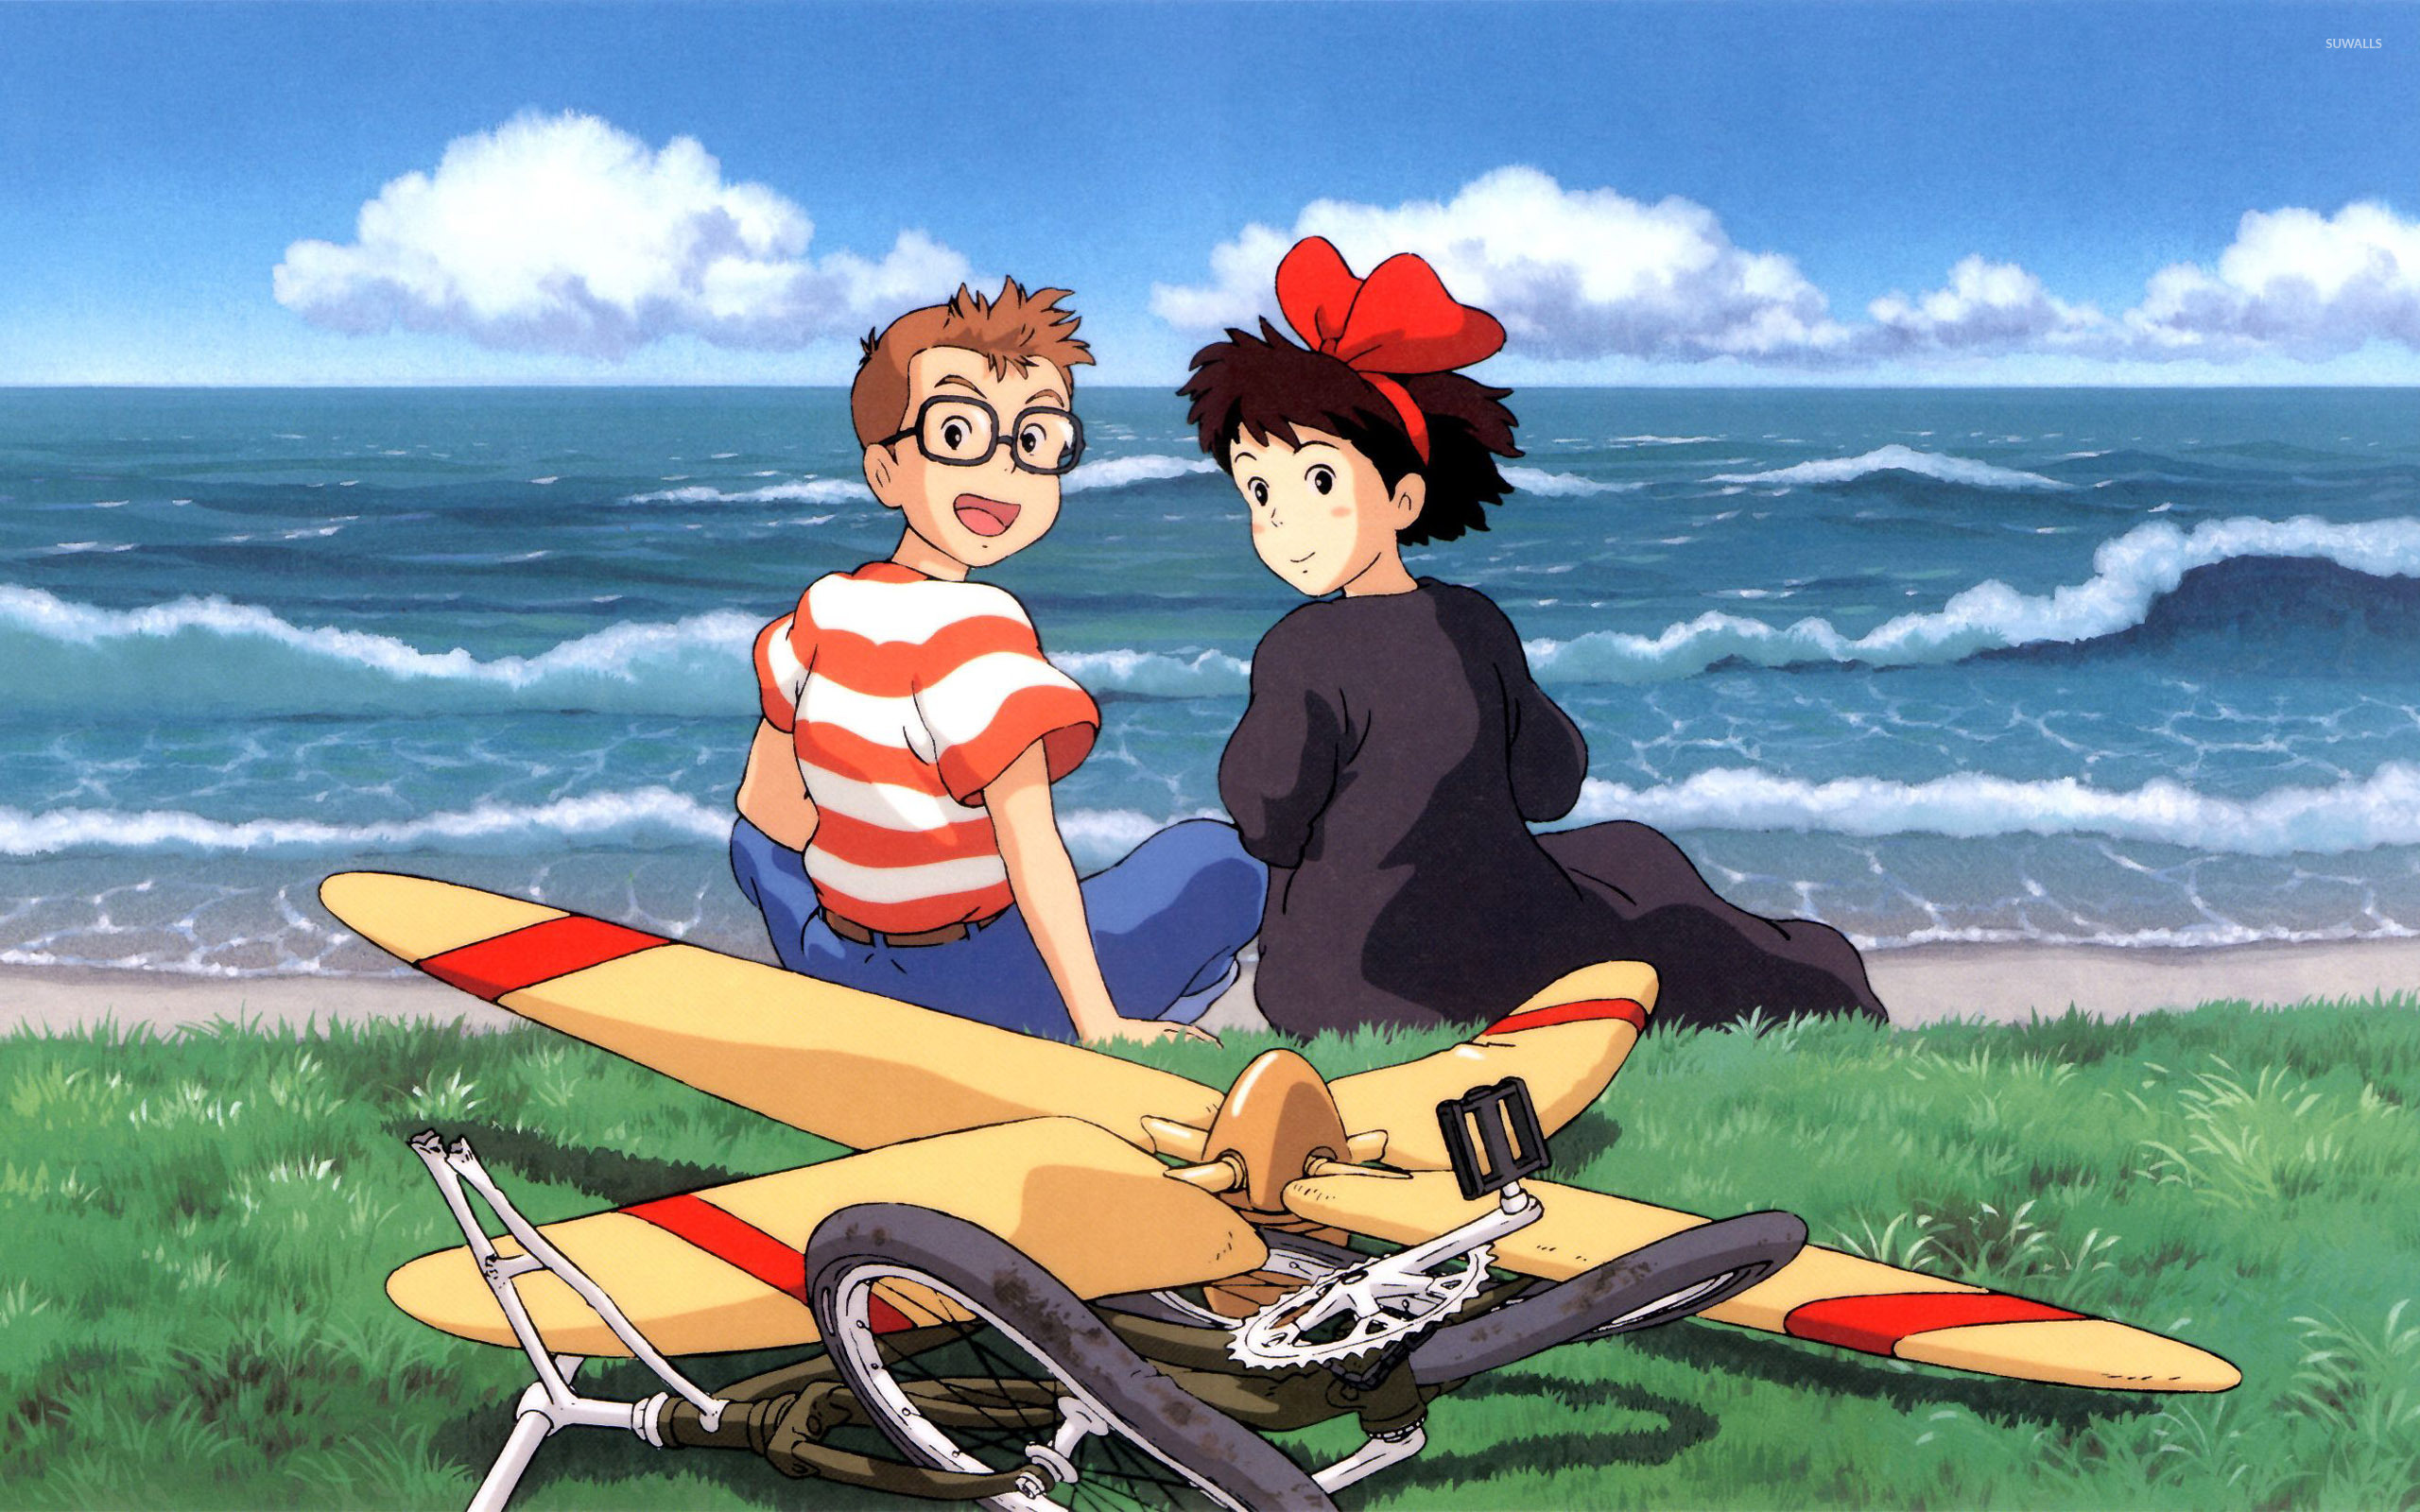 27 Kikis Delivery Service Wallpapers for iPhone and Android by Dustin  Villa